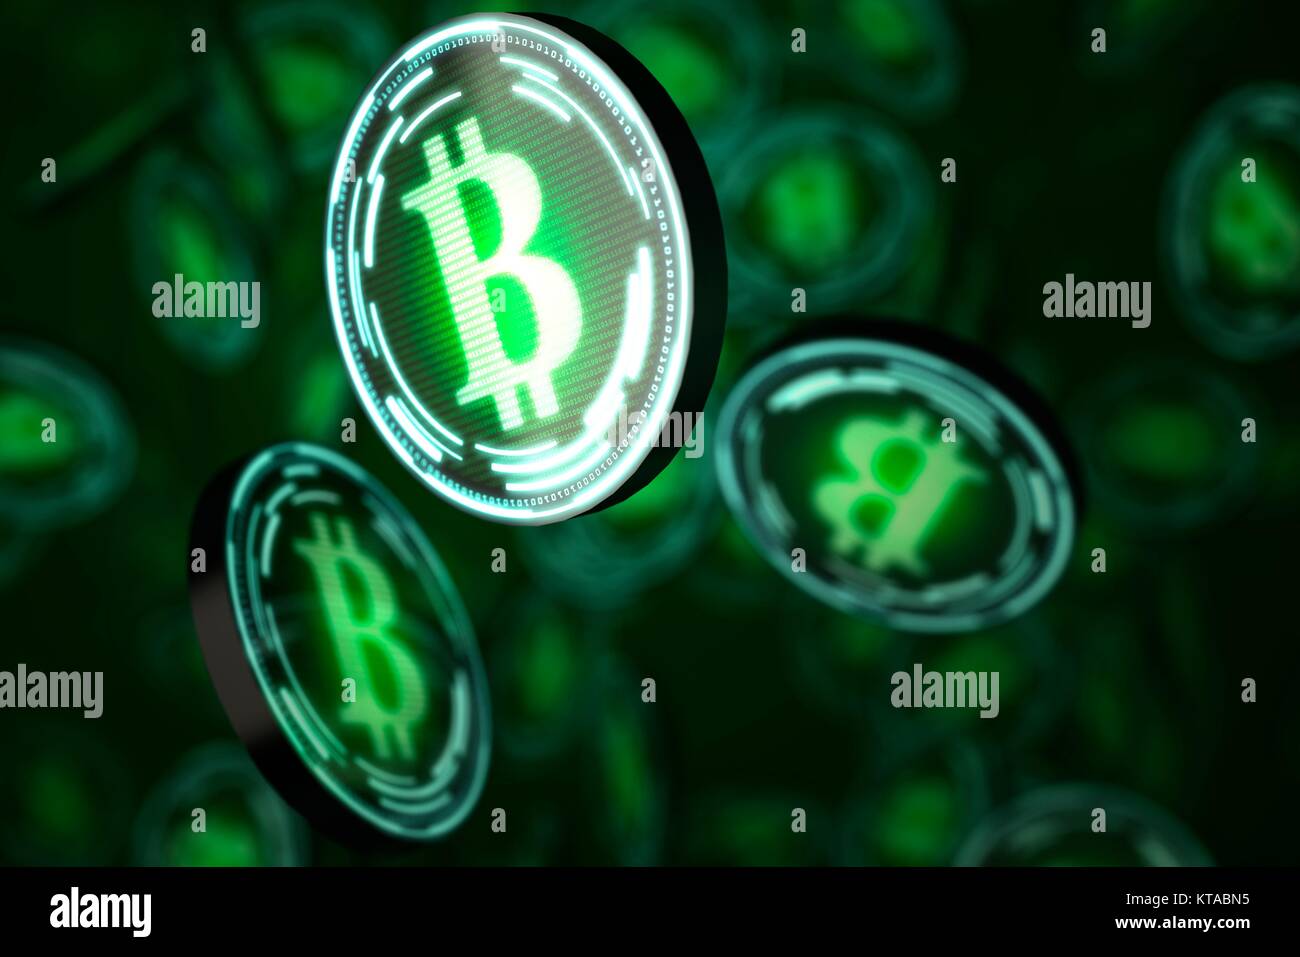 Conceptual artwork representing the bitcoin cryptocurrency. Bitcoin is a type of digital currency, created in 2009, which operates independently of any bank. Certain vendors now accept Bitcoins as payment of goods or services. Stock Photo